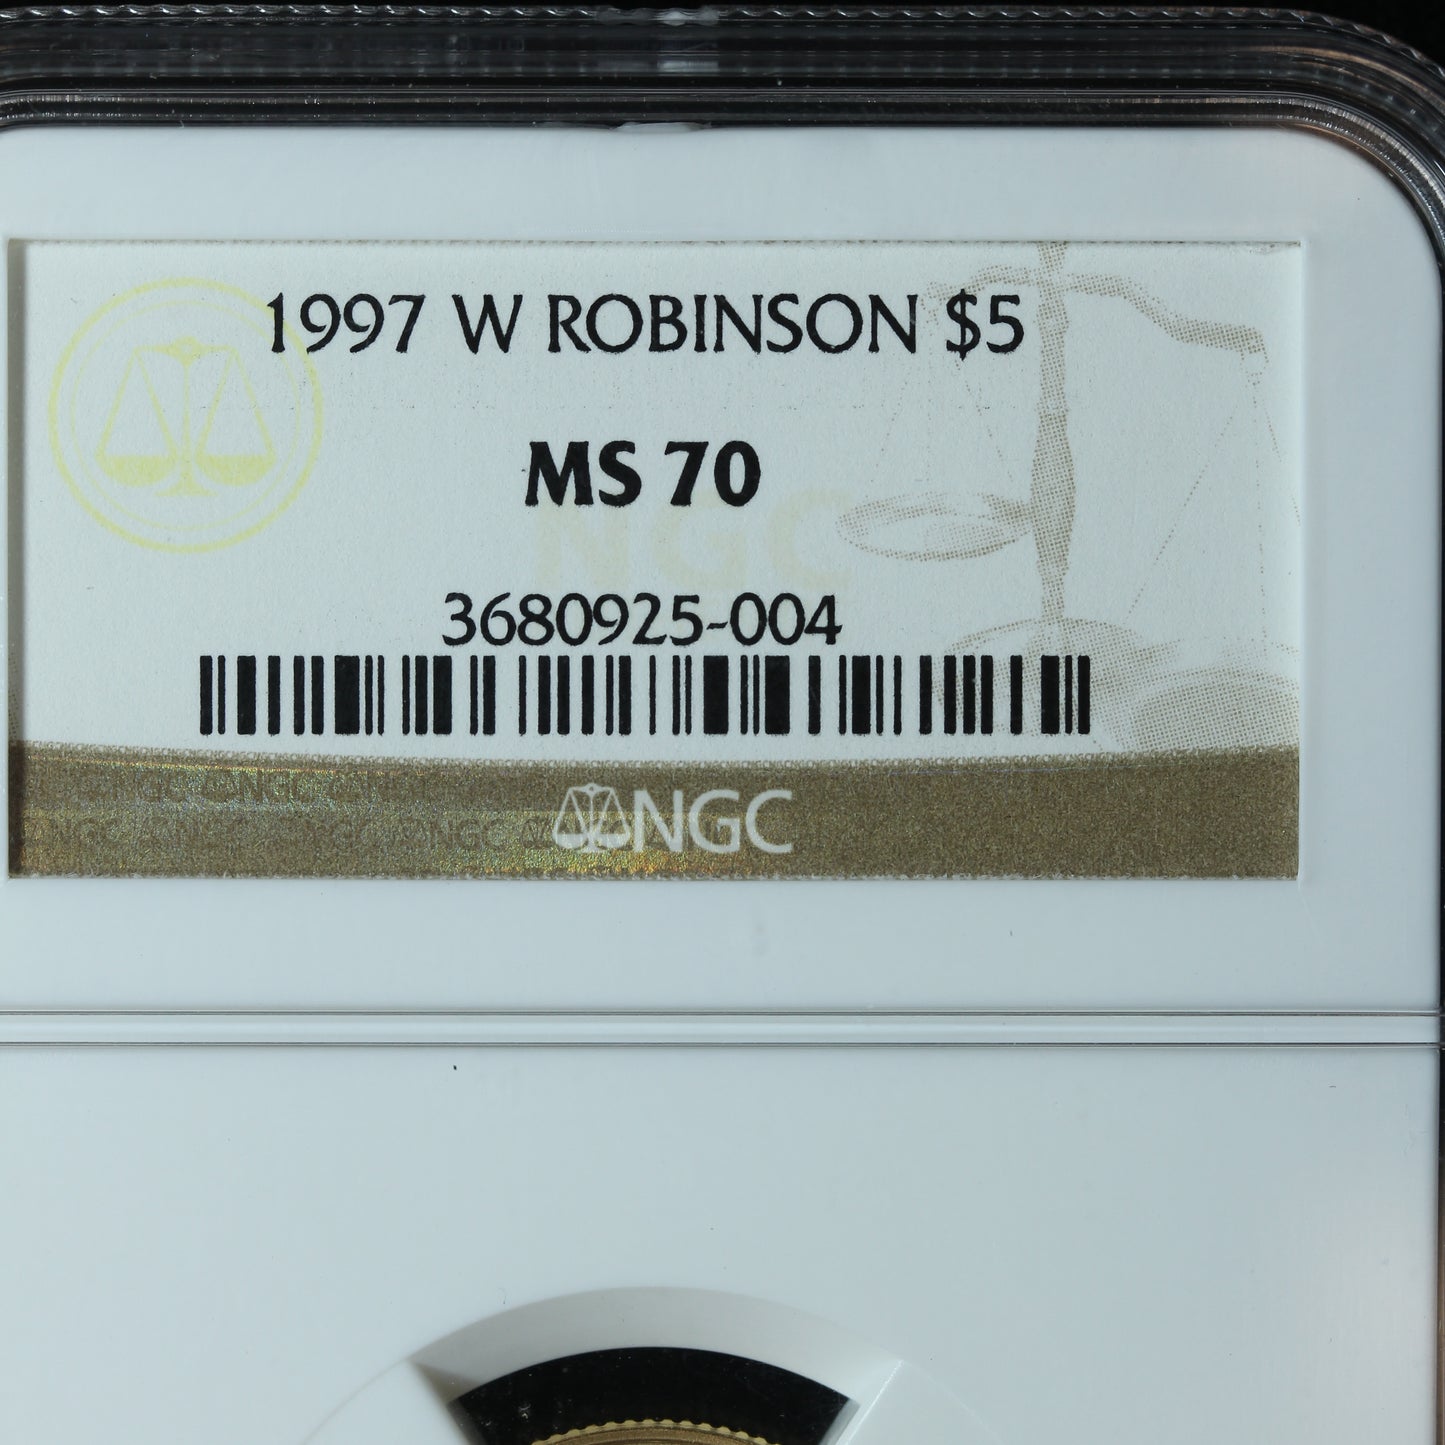 1997-W $5 Jackie Robinson US Gold Commemorative NGC MS 70